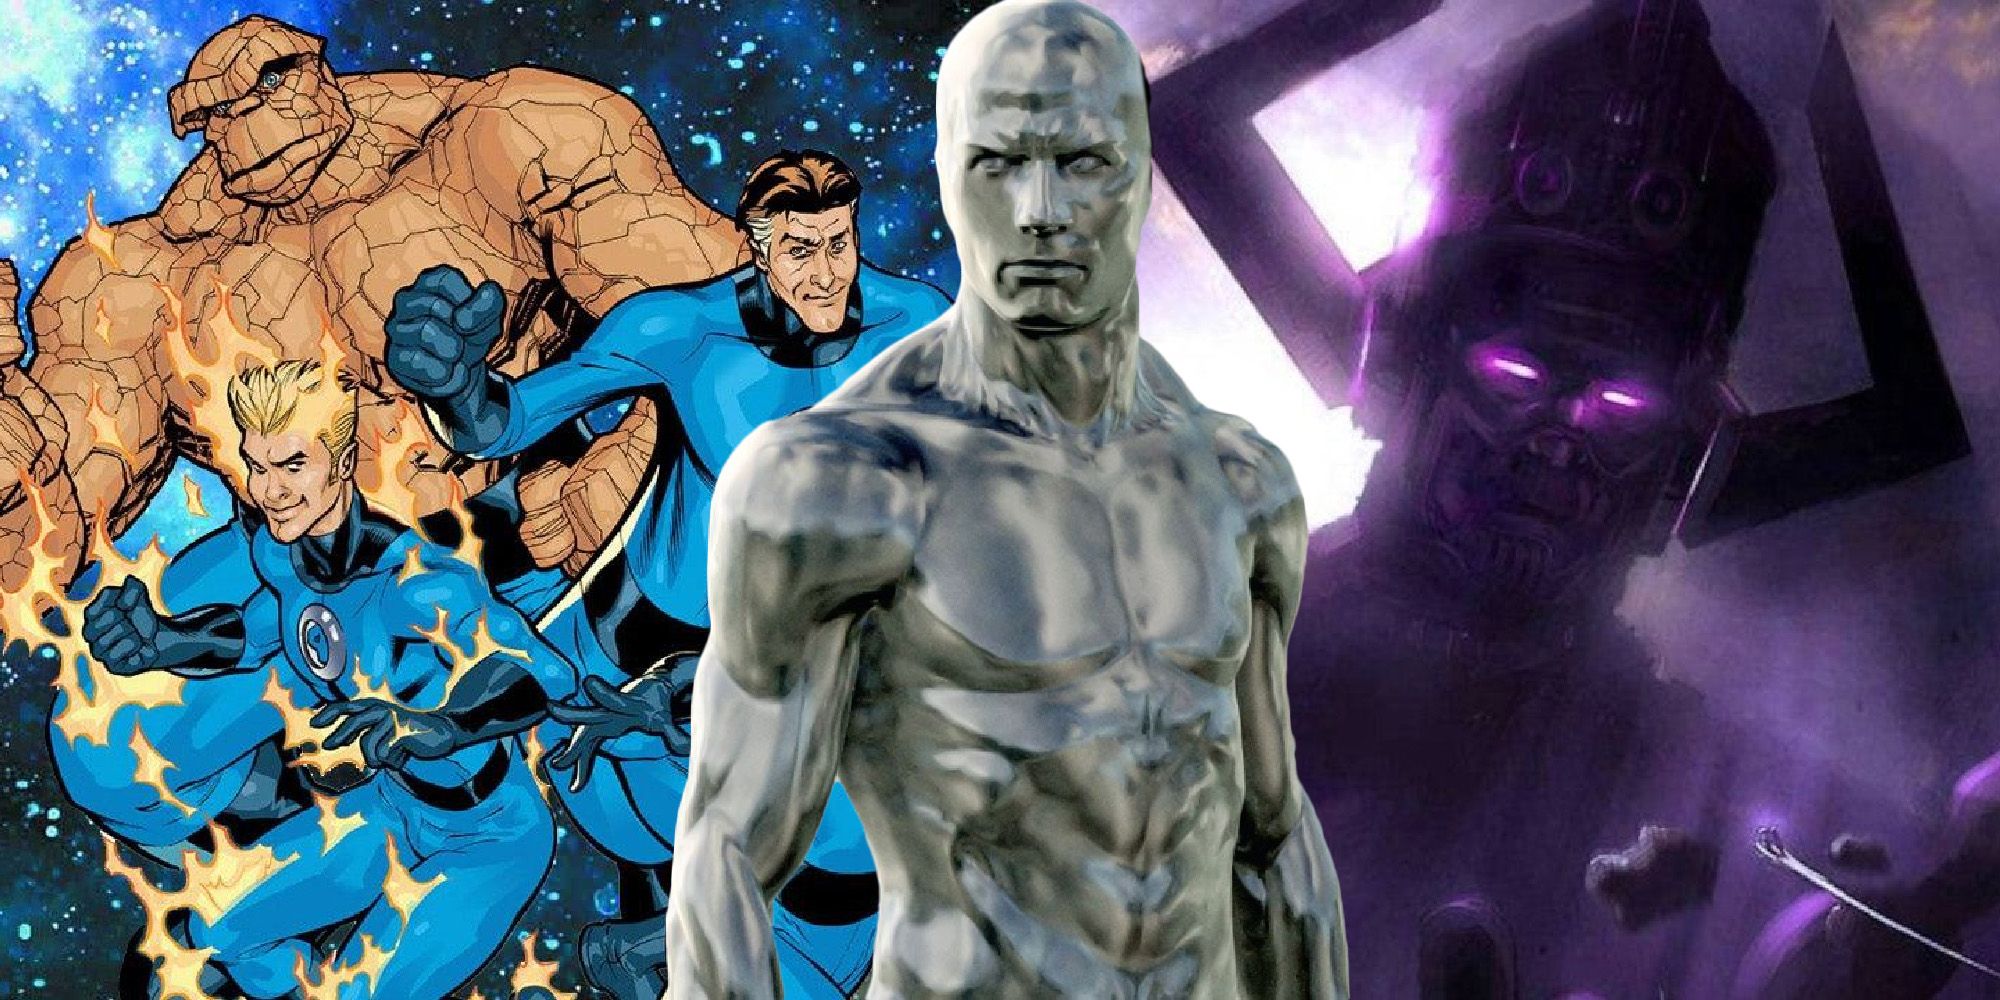 Custom image of Silver Surfer, the Fantastic Four, and Galactus side by side.